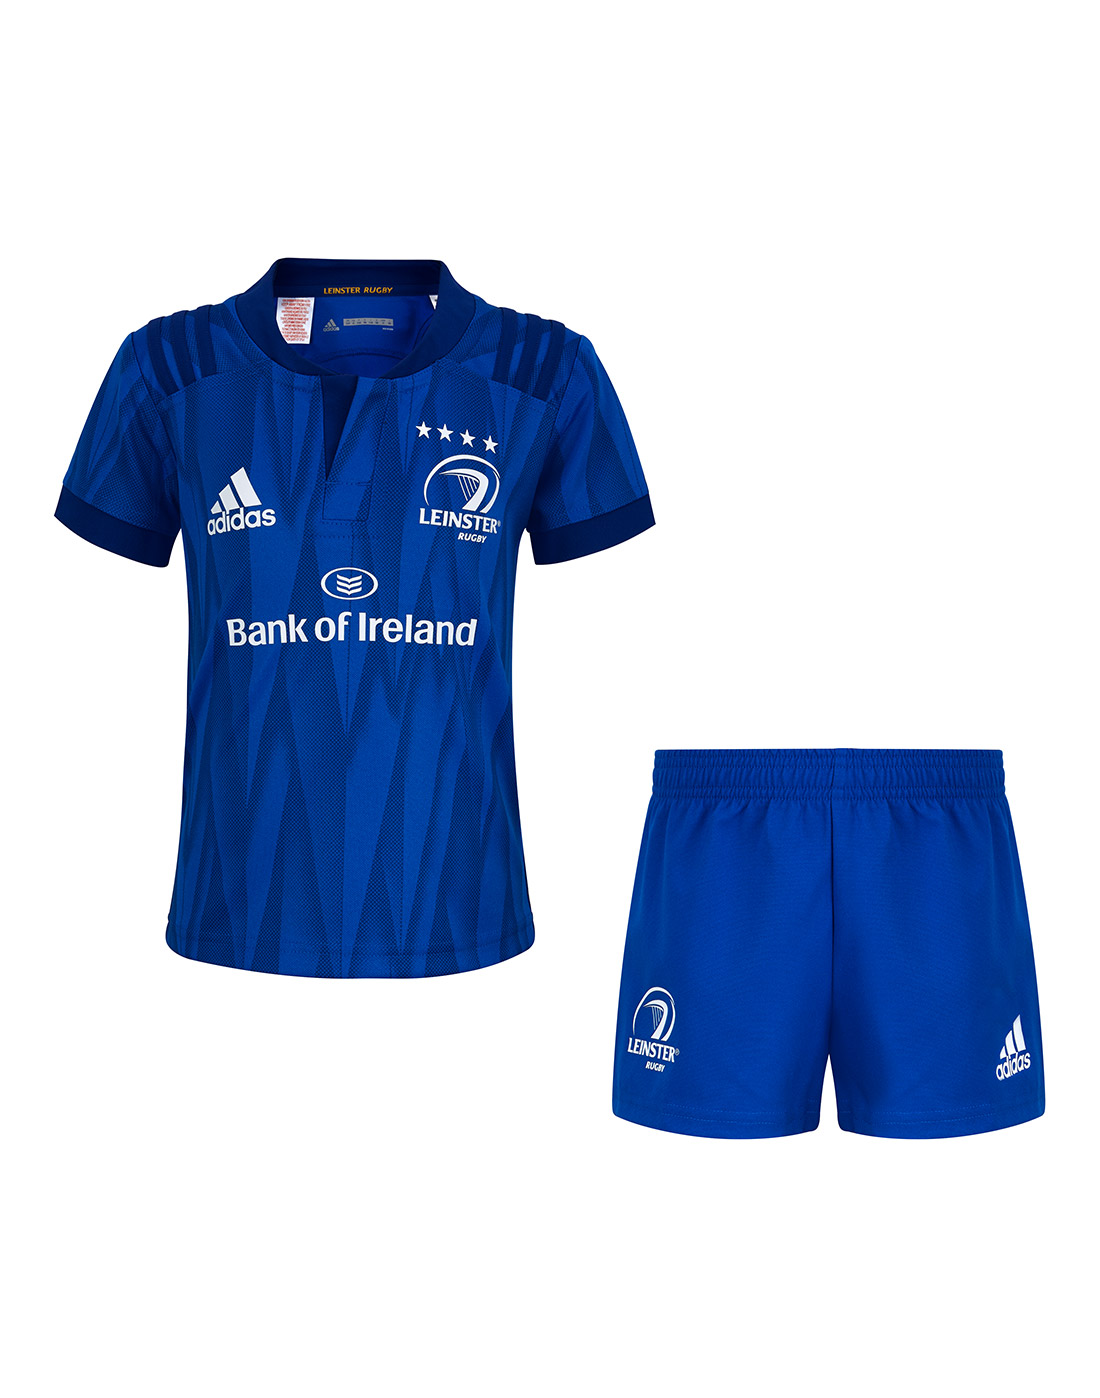 adidas Leinster Home Infants Kit 2019/20 - Blue | Life Style Sports IE